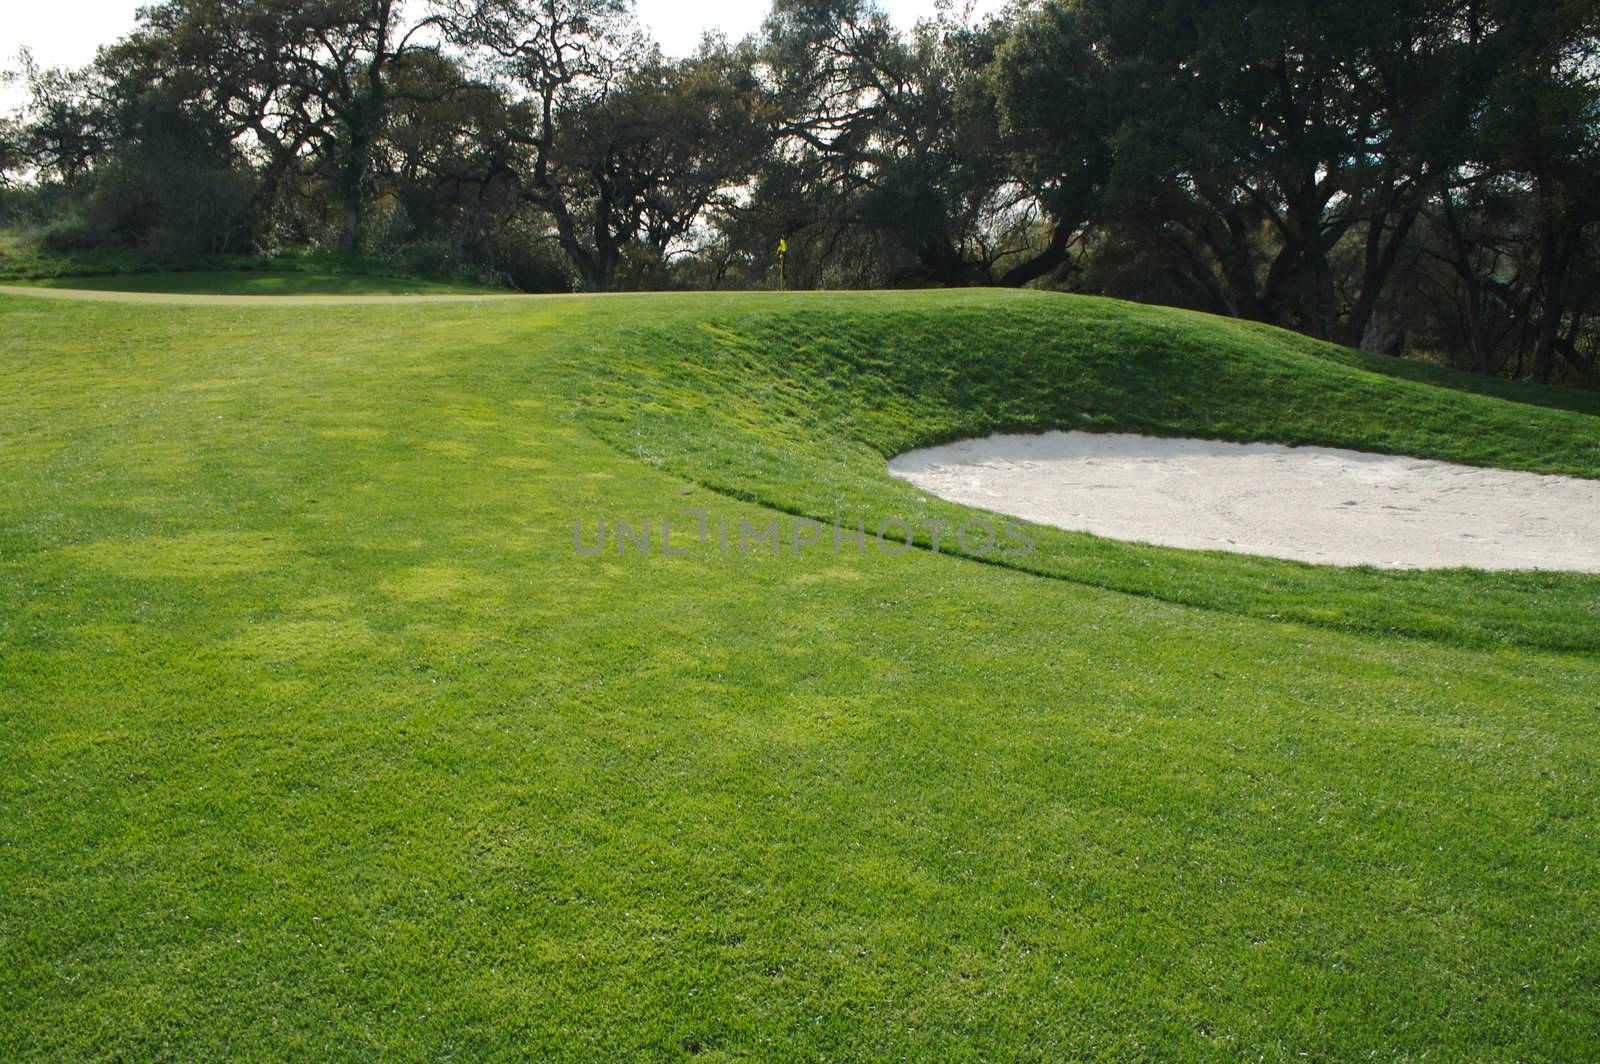 Abstract of Golf Course Bunkers by Feverpitched